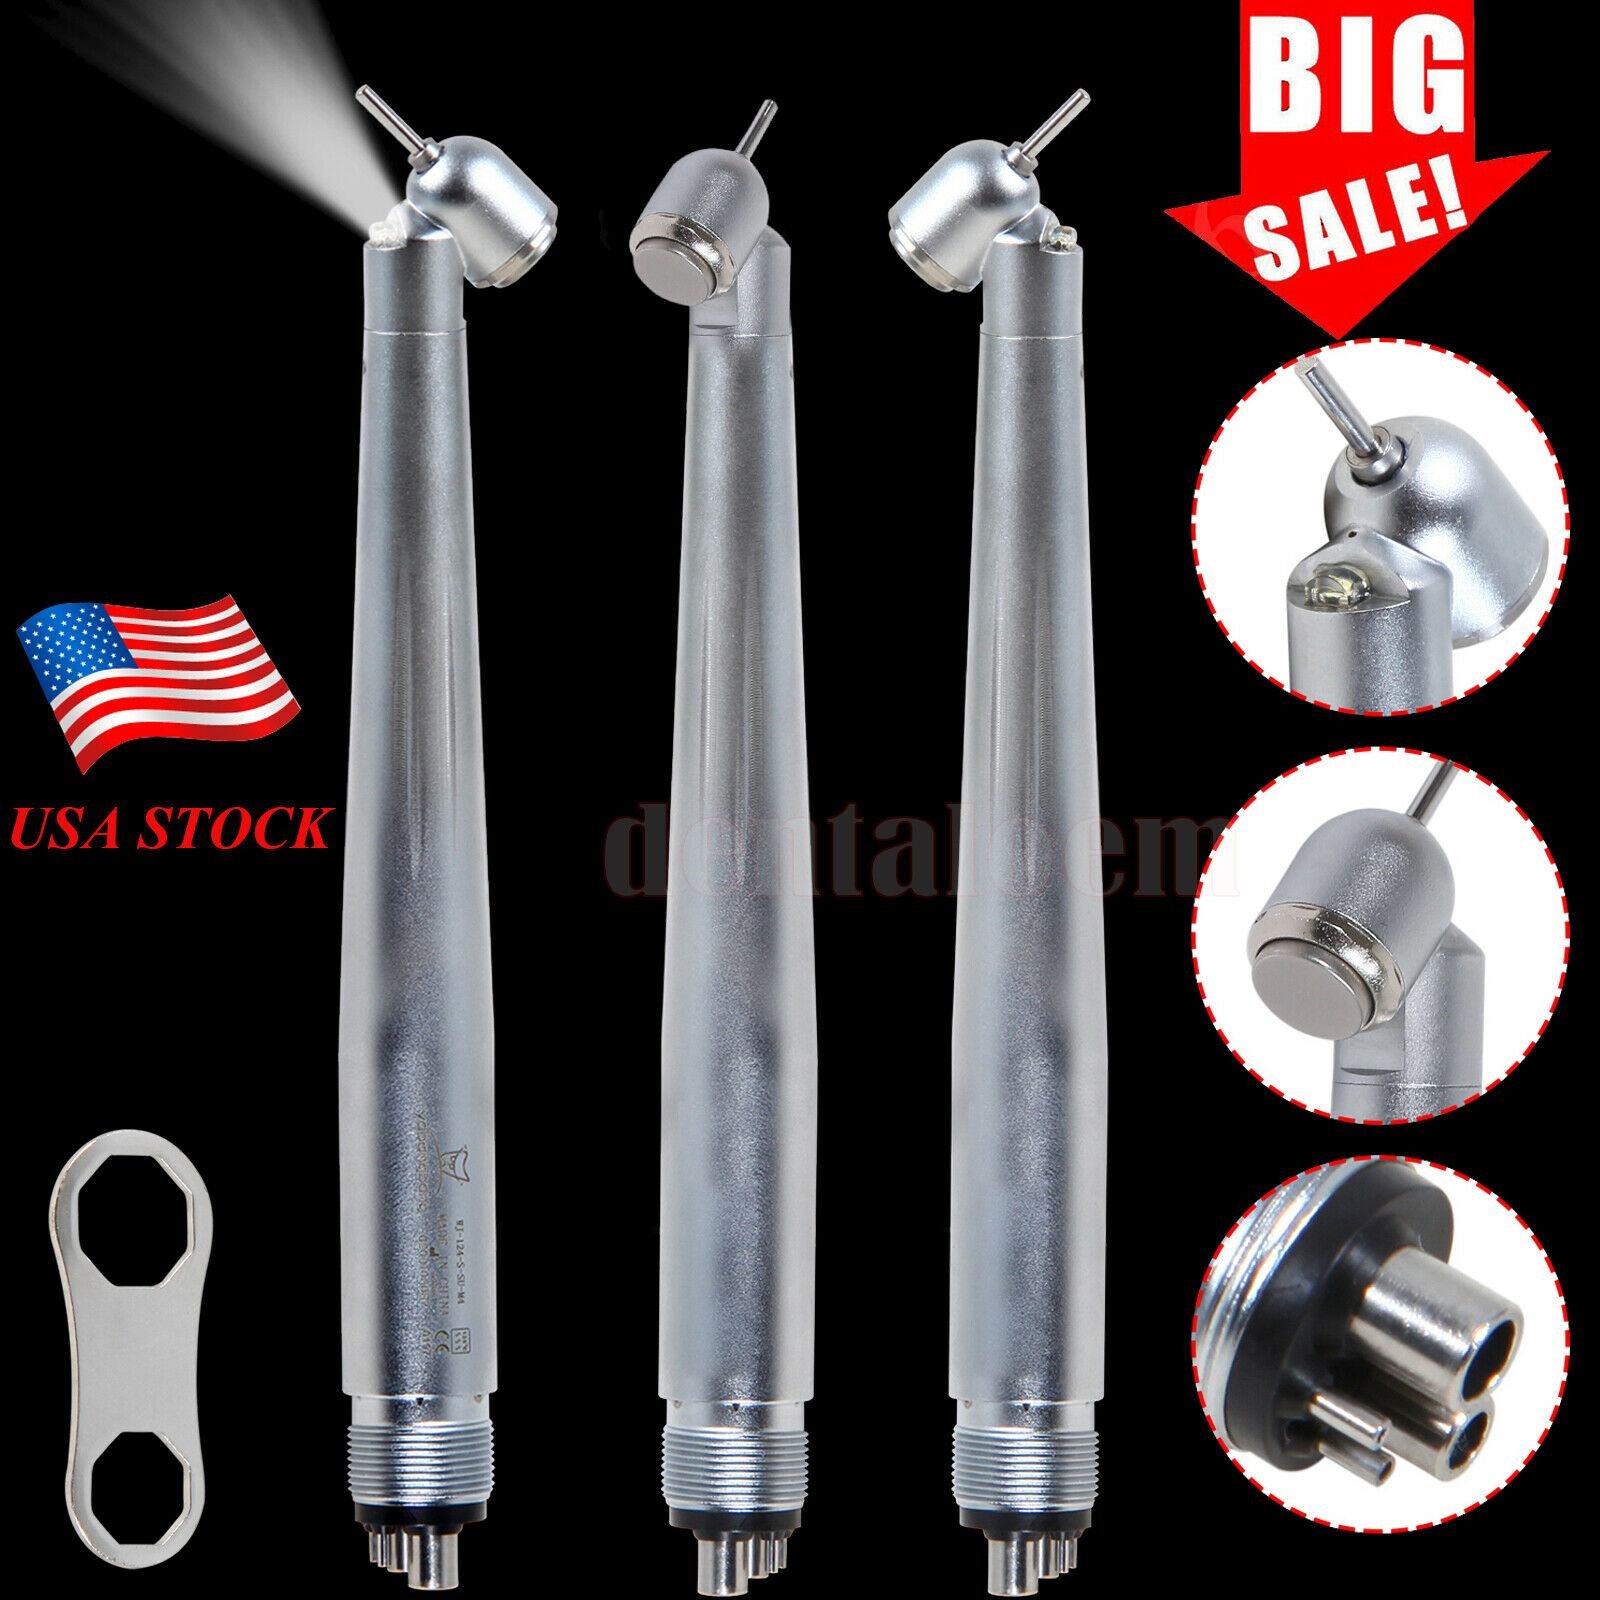 Nsk Pana Max Type Dental Led 45 Degree Surgical High Speed Handpiece Turbine 4-h